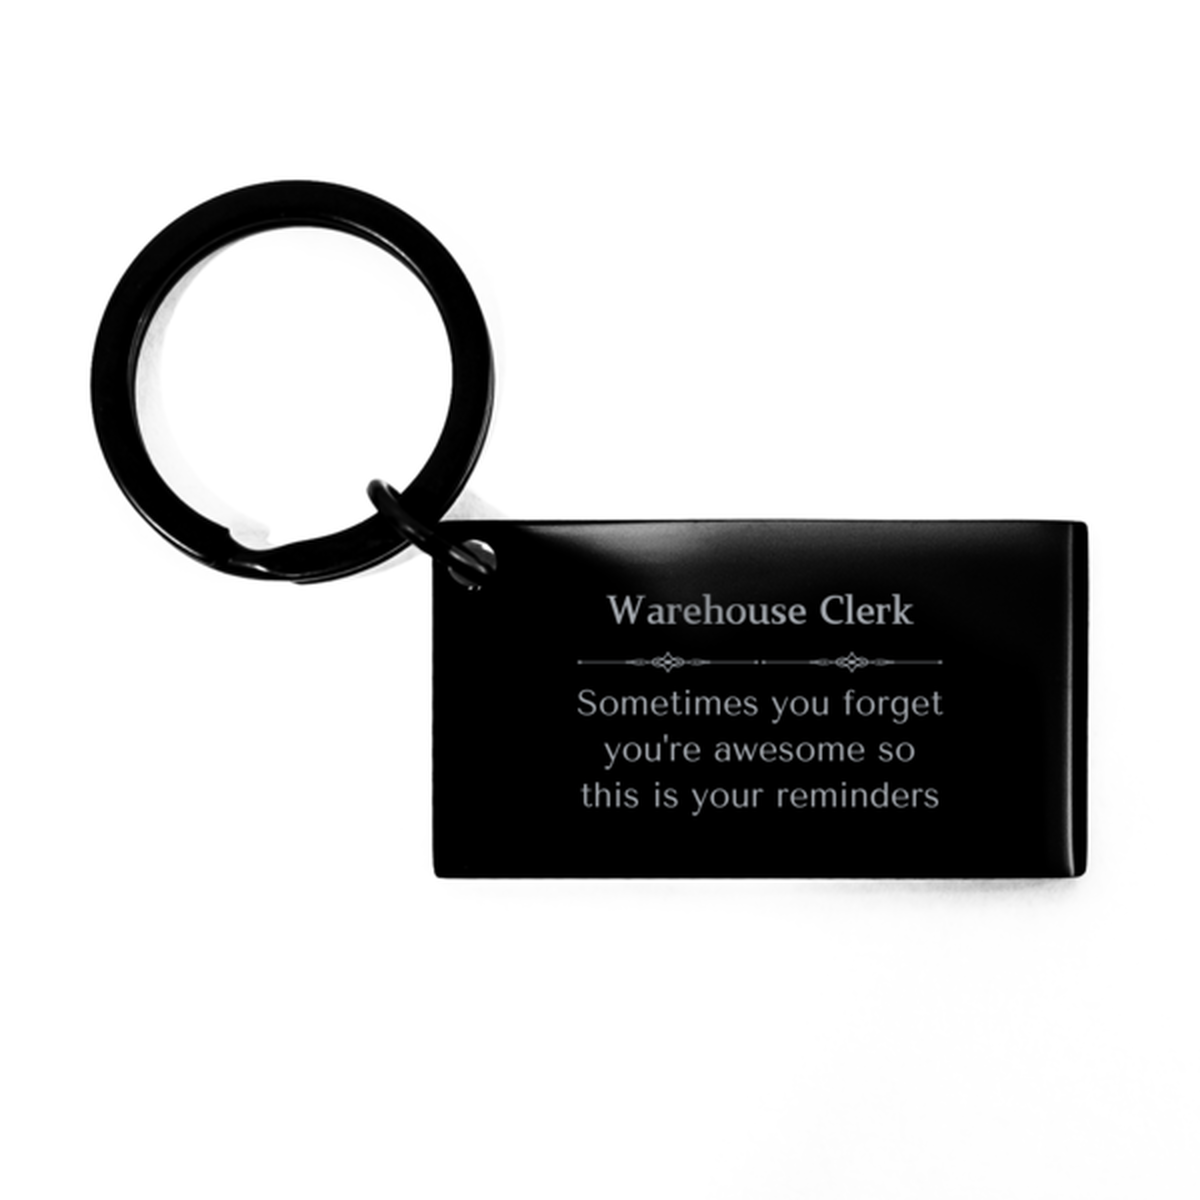 Sentimental Warehouse Clerk Keychain, Architect Sometimes you forget you're awesome so this is your reminders, Graduation Christmas Birthday Gifts for Warehouse Clerk, Men, Women, Coworkers